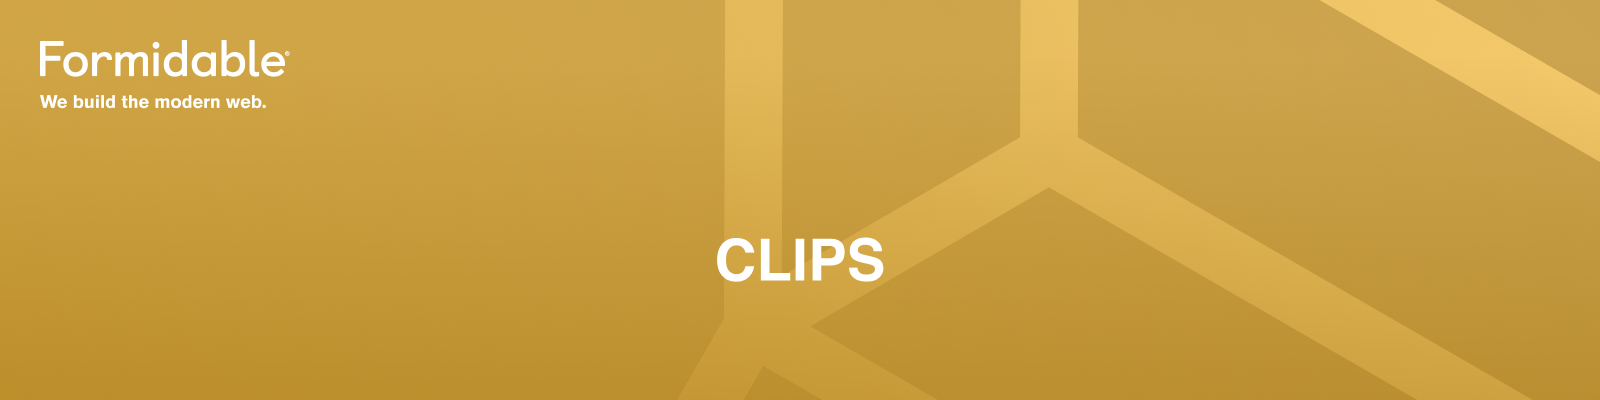 Clips — Formidable, We build the modern web